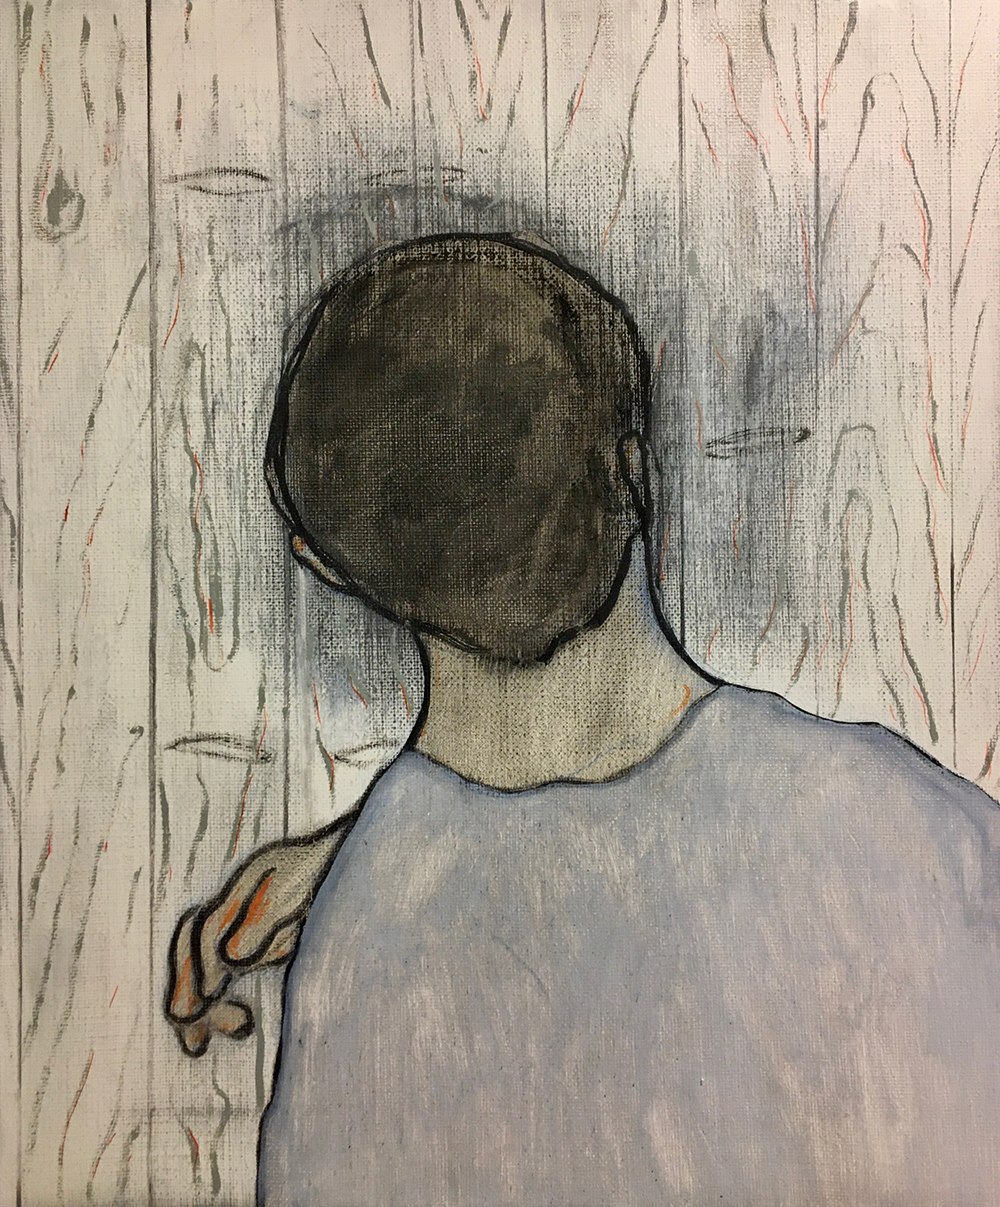 Francisco Rodriguez.<em> Head One</em>, 2019. Oil and charcoal on linen, 23 5/8 x 19 5/8 inches (60 x 50 cm)